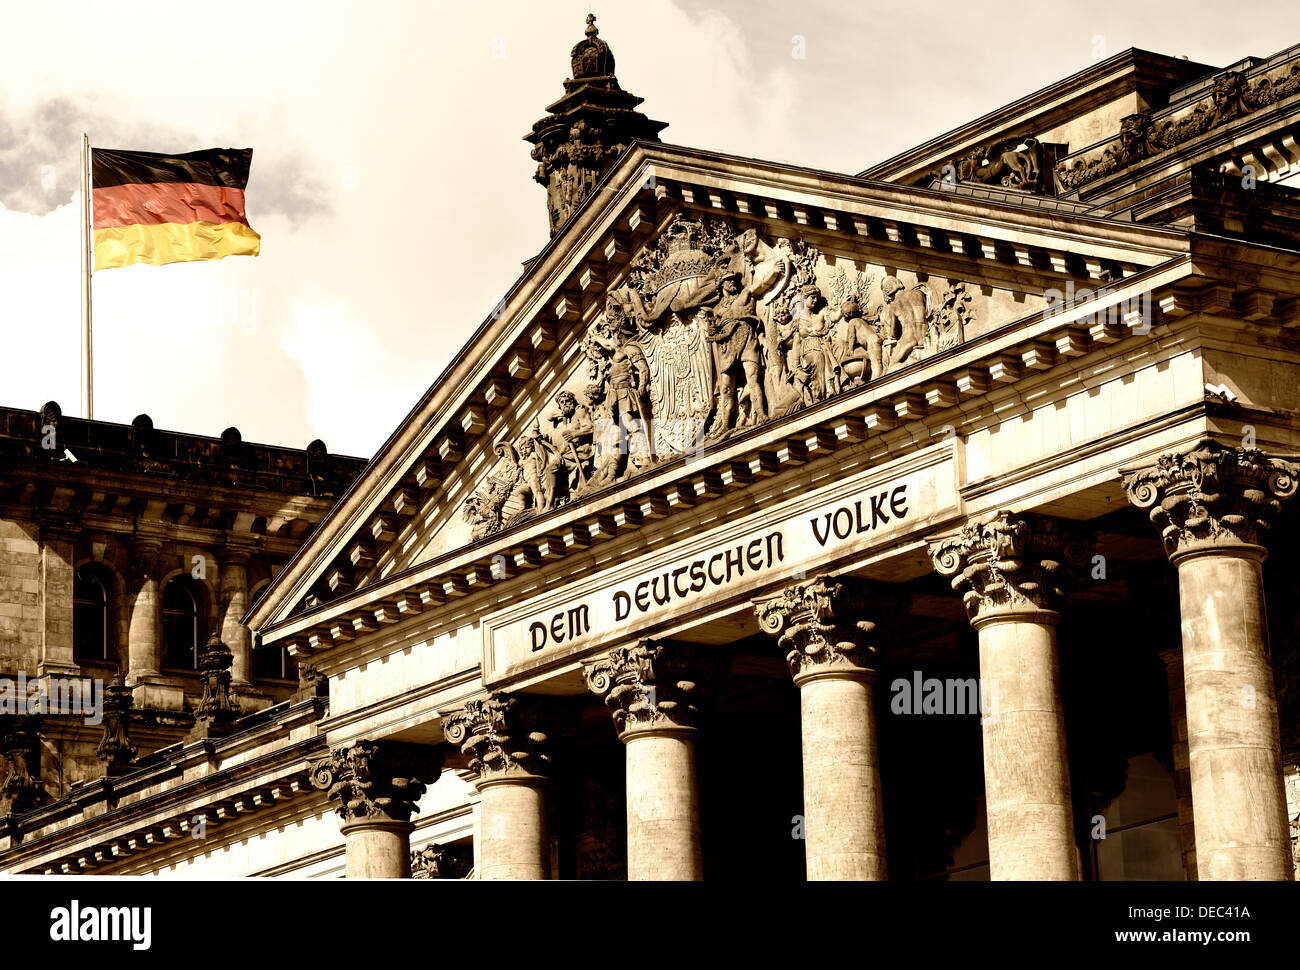 German flag flying at the Reichstag Building of the German Federal Parliament, with the inscription 'Dem Deutschen Volke', Stock Photo